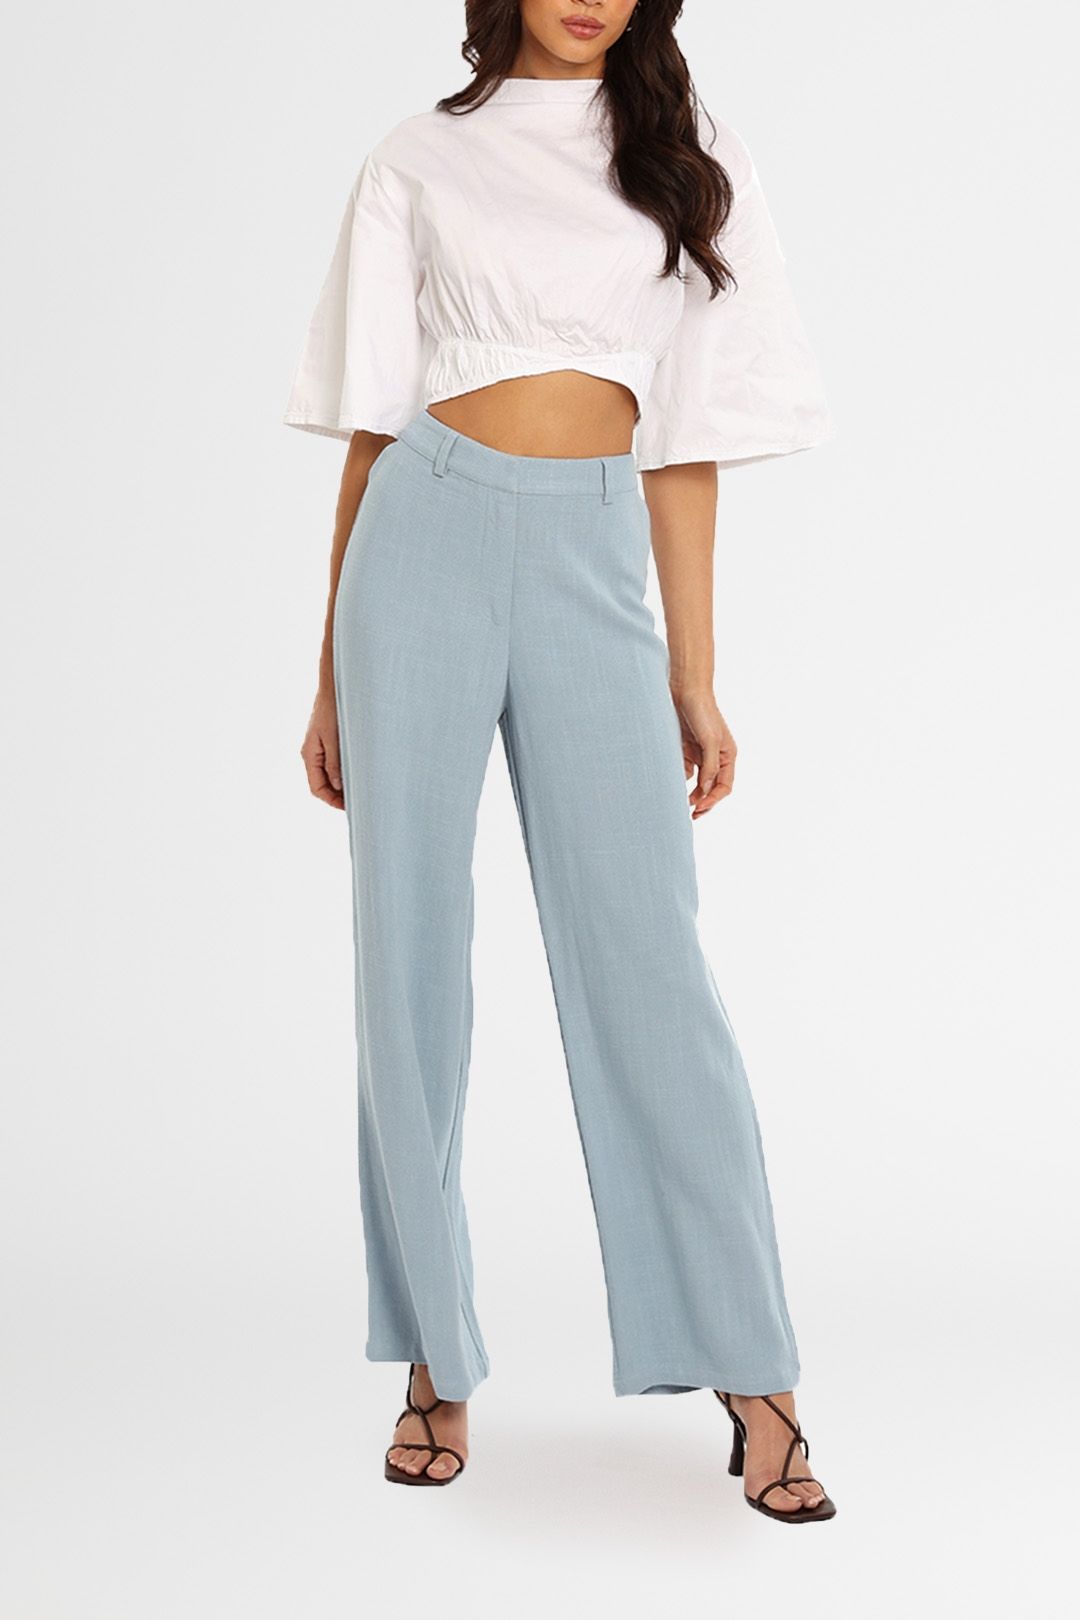 Staple The Label Florence Wide Leg Pants